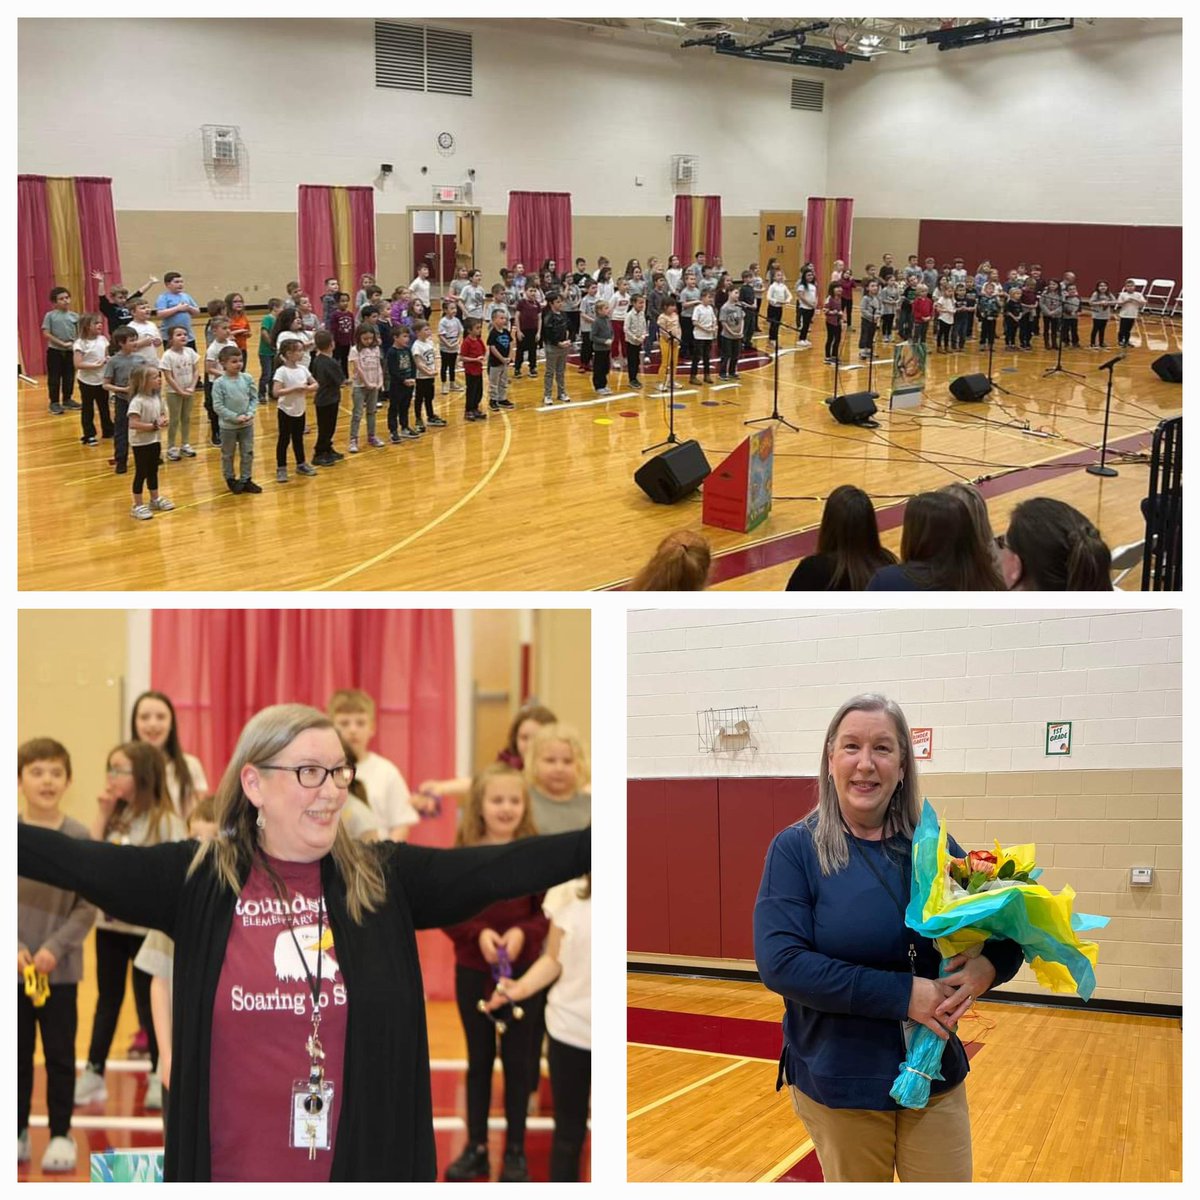 We've had a fantastic Music In Our Schools Month at RES. Student created artwork on the walls and an amazing spring musical by our K-2 students. I love making music with these kiddos! #MIOSM @KedcARTS @KEDCGrants